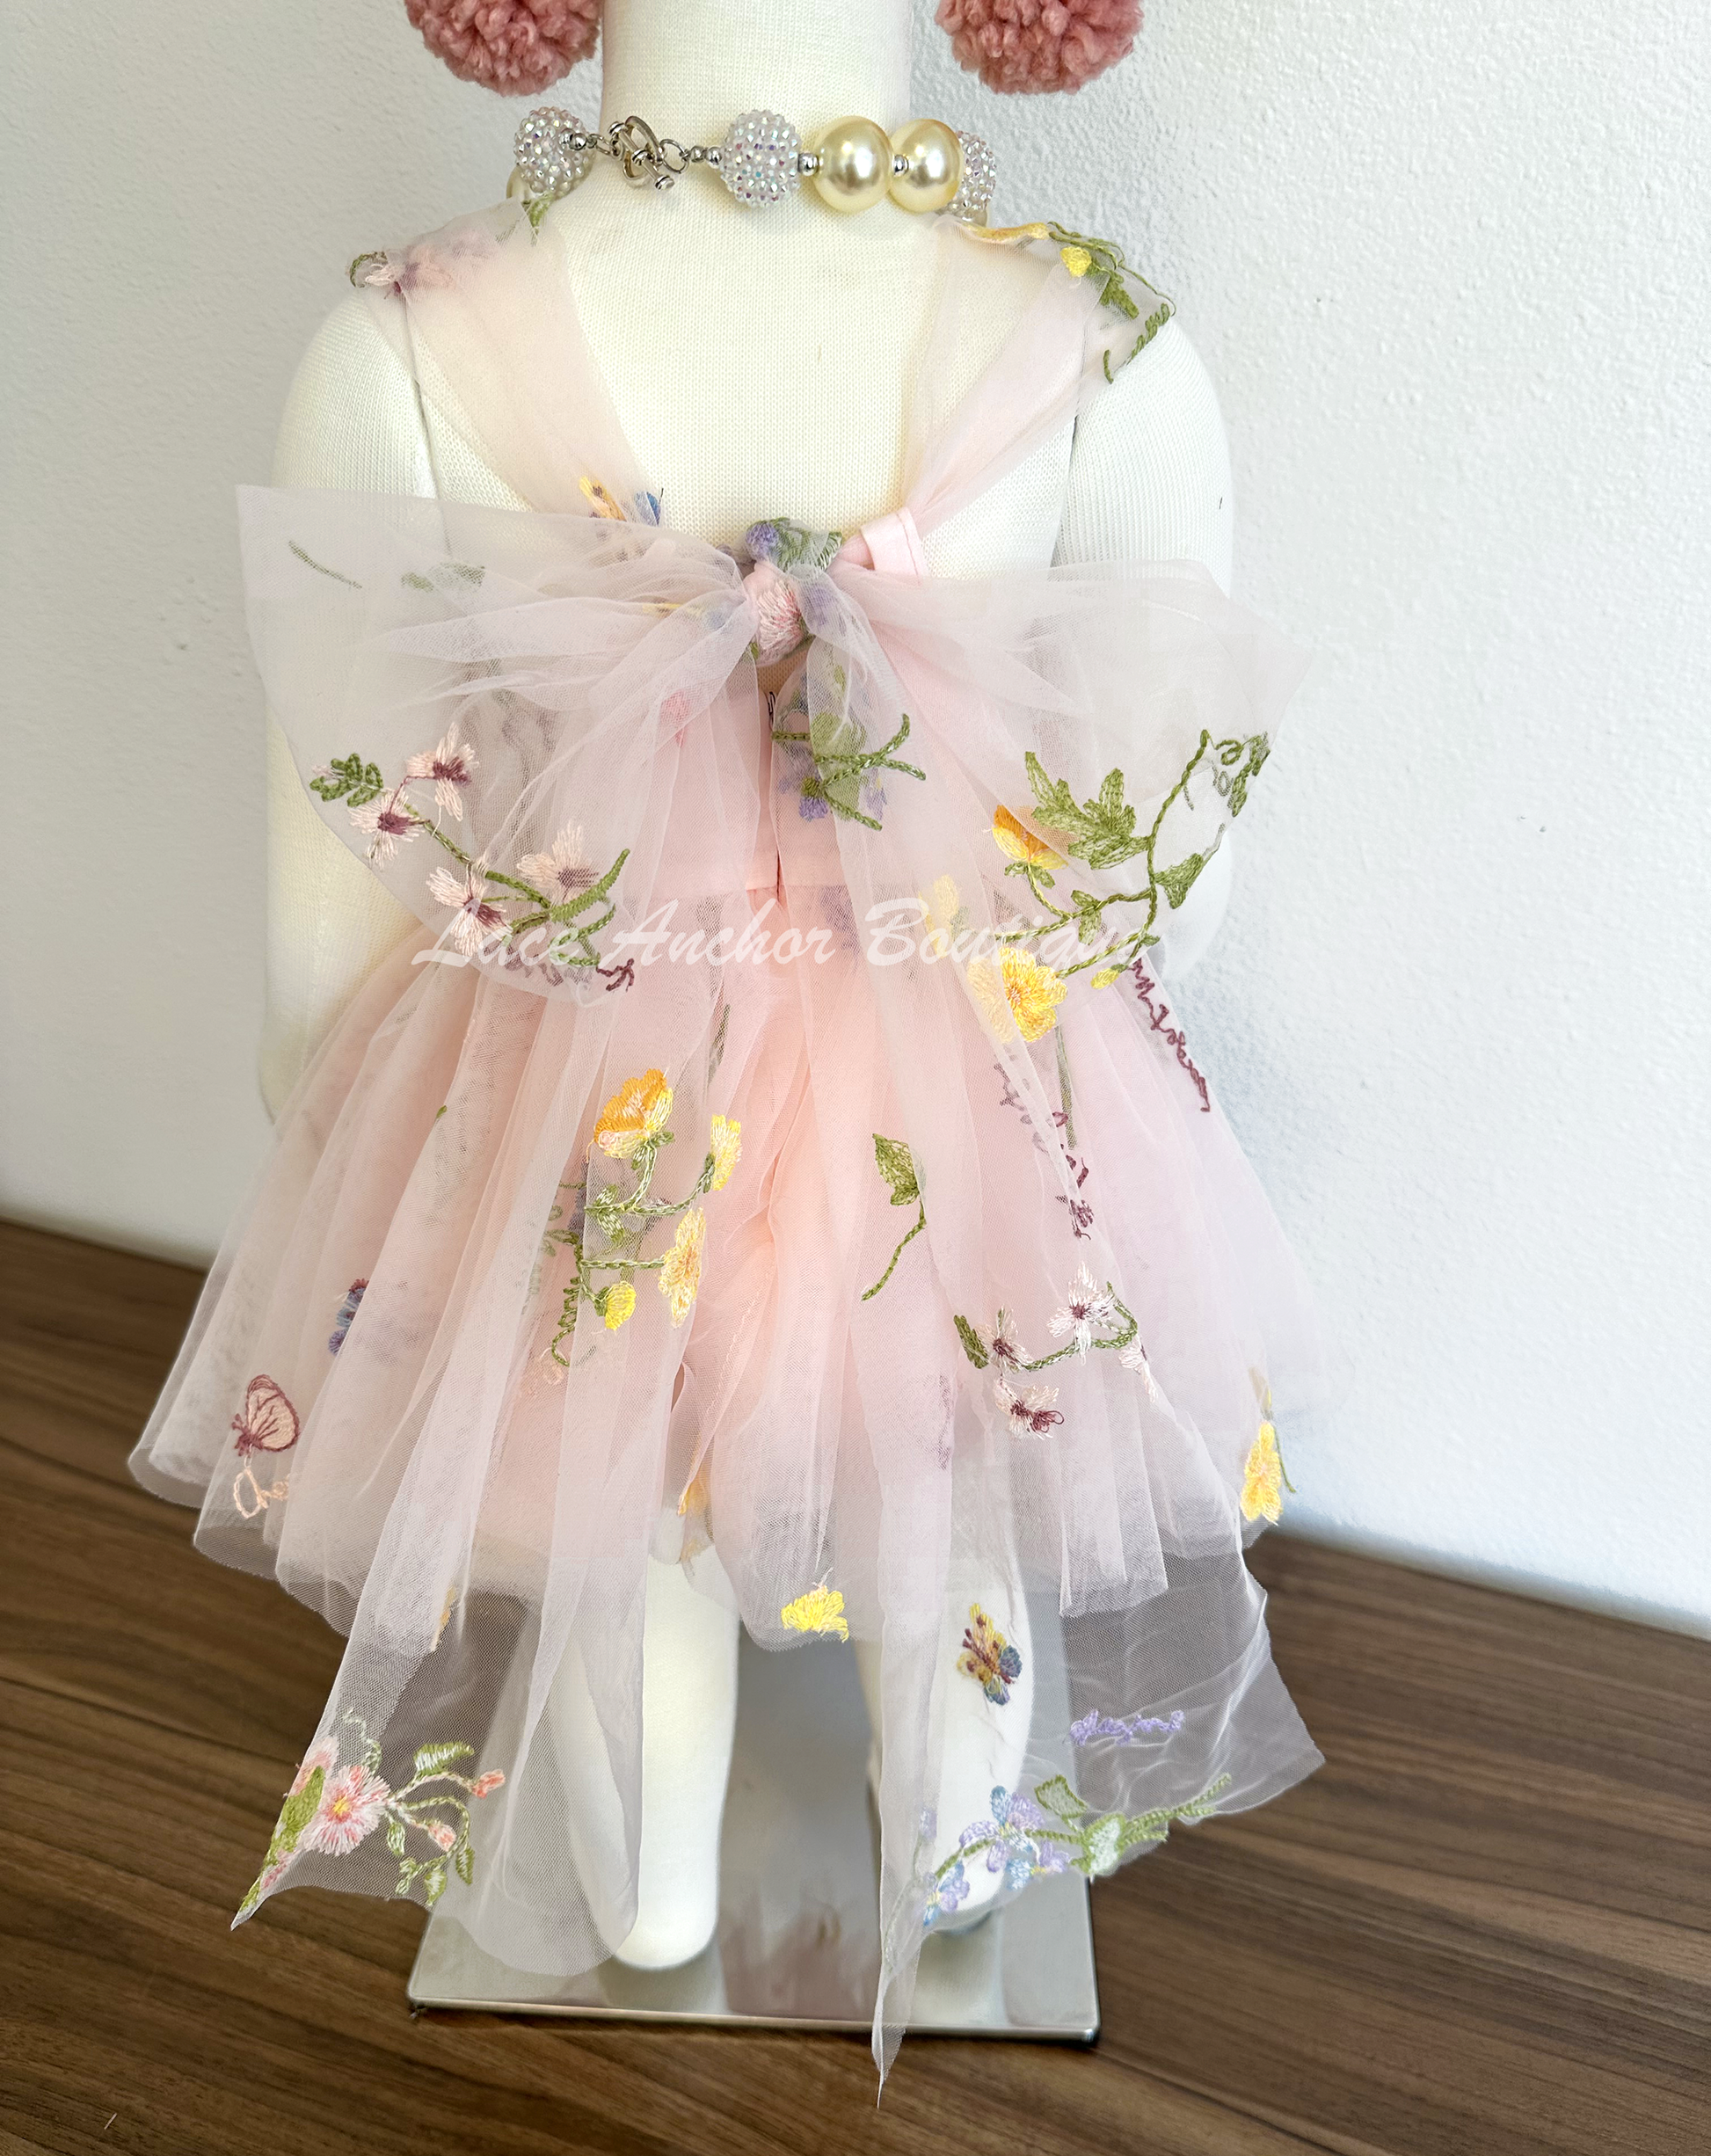 Baby girls romper with tied back fluffy bow. Outfits in light blush pink with embroidered floral print.